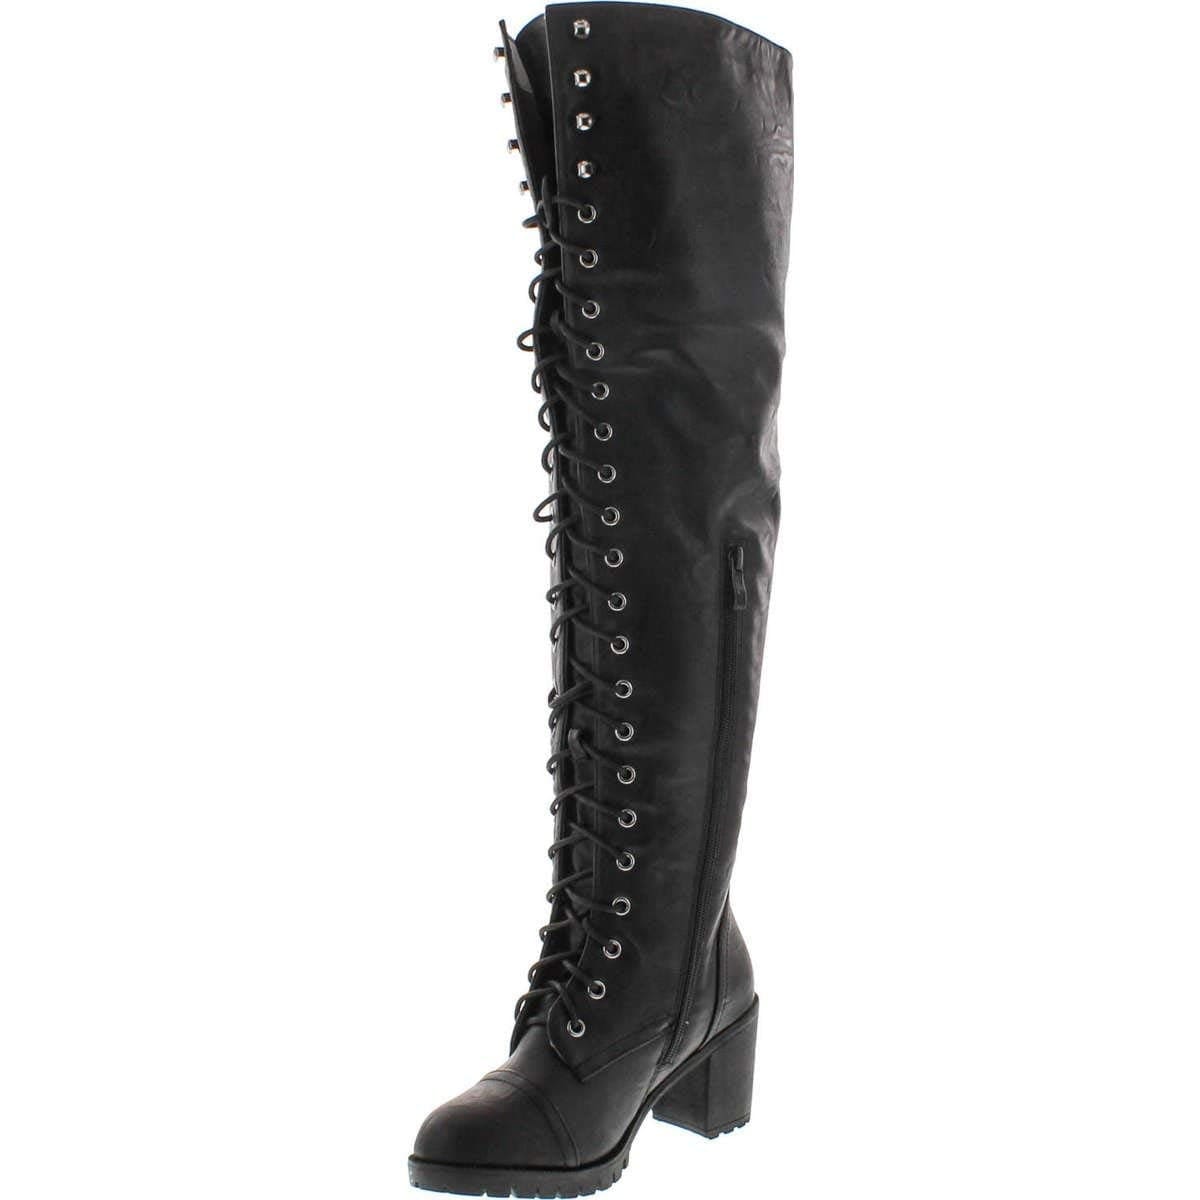 thigh high lace up combat boots